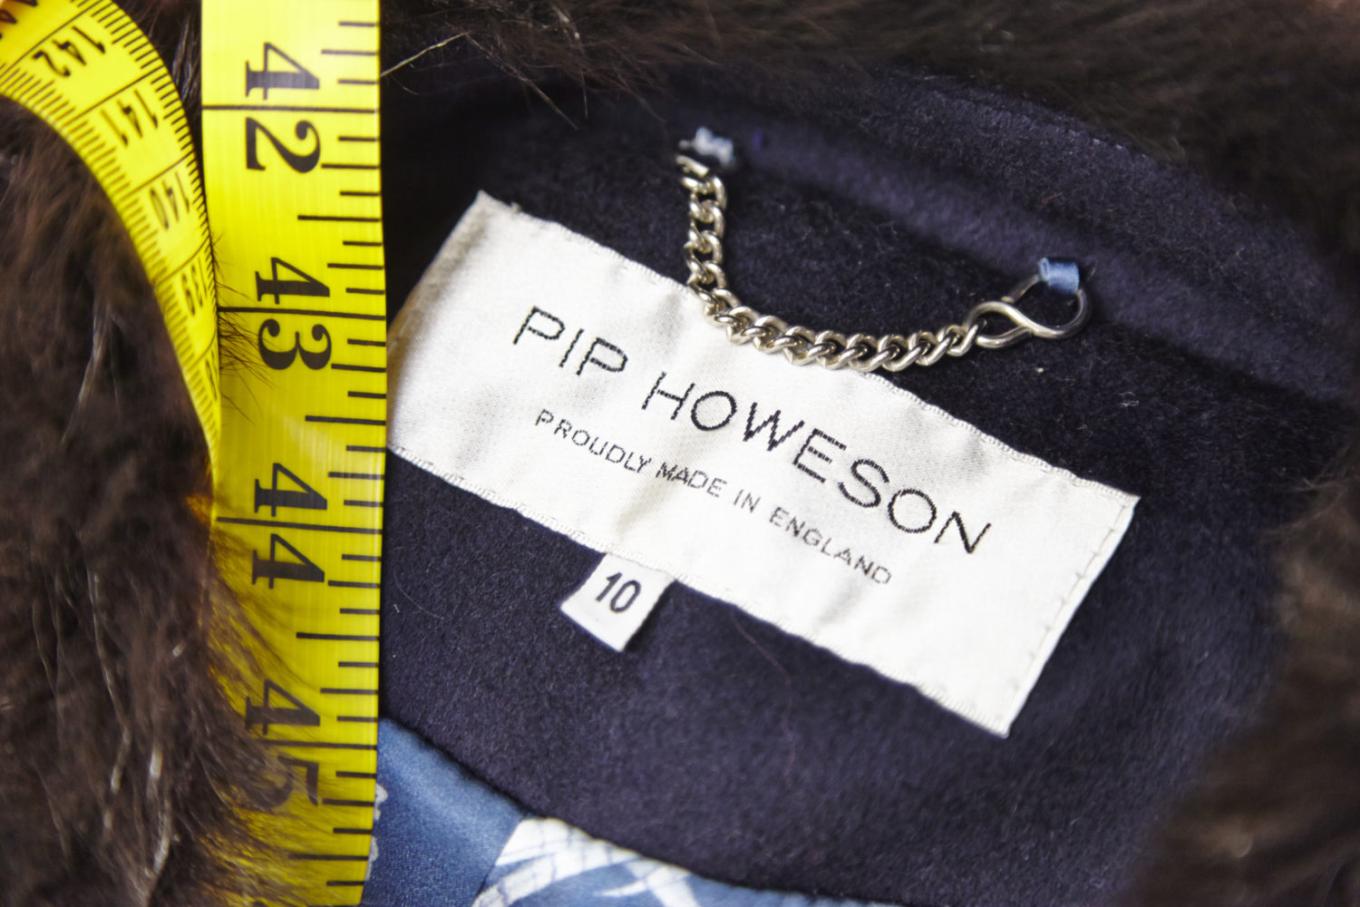 A close up of a Pip Howeson clothes label with a tape measure on top